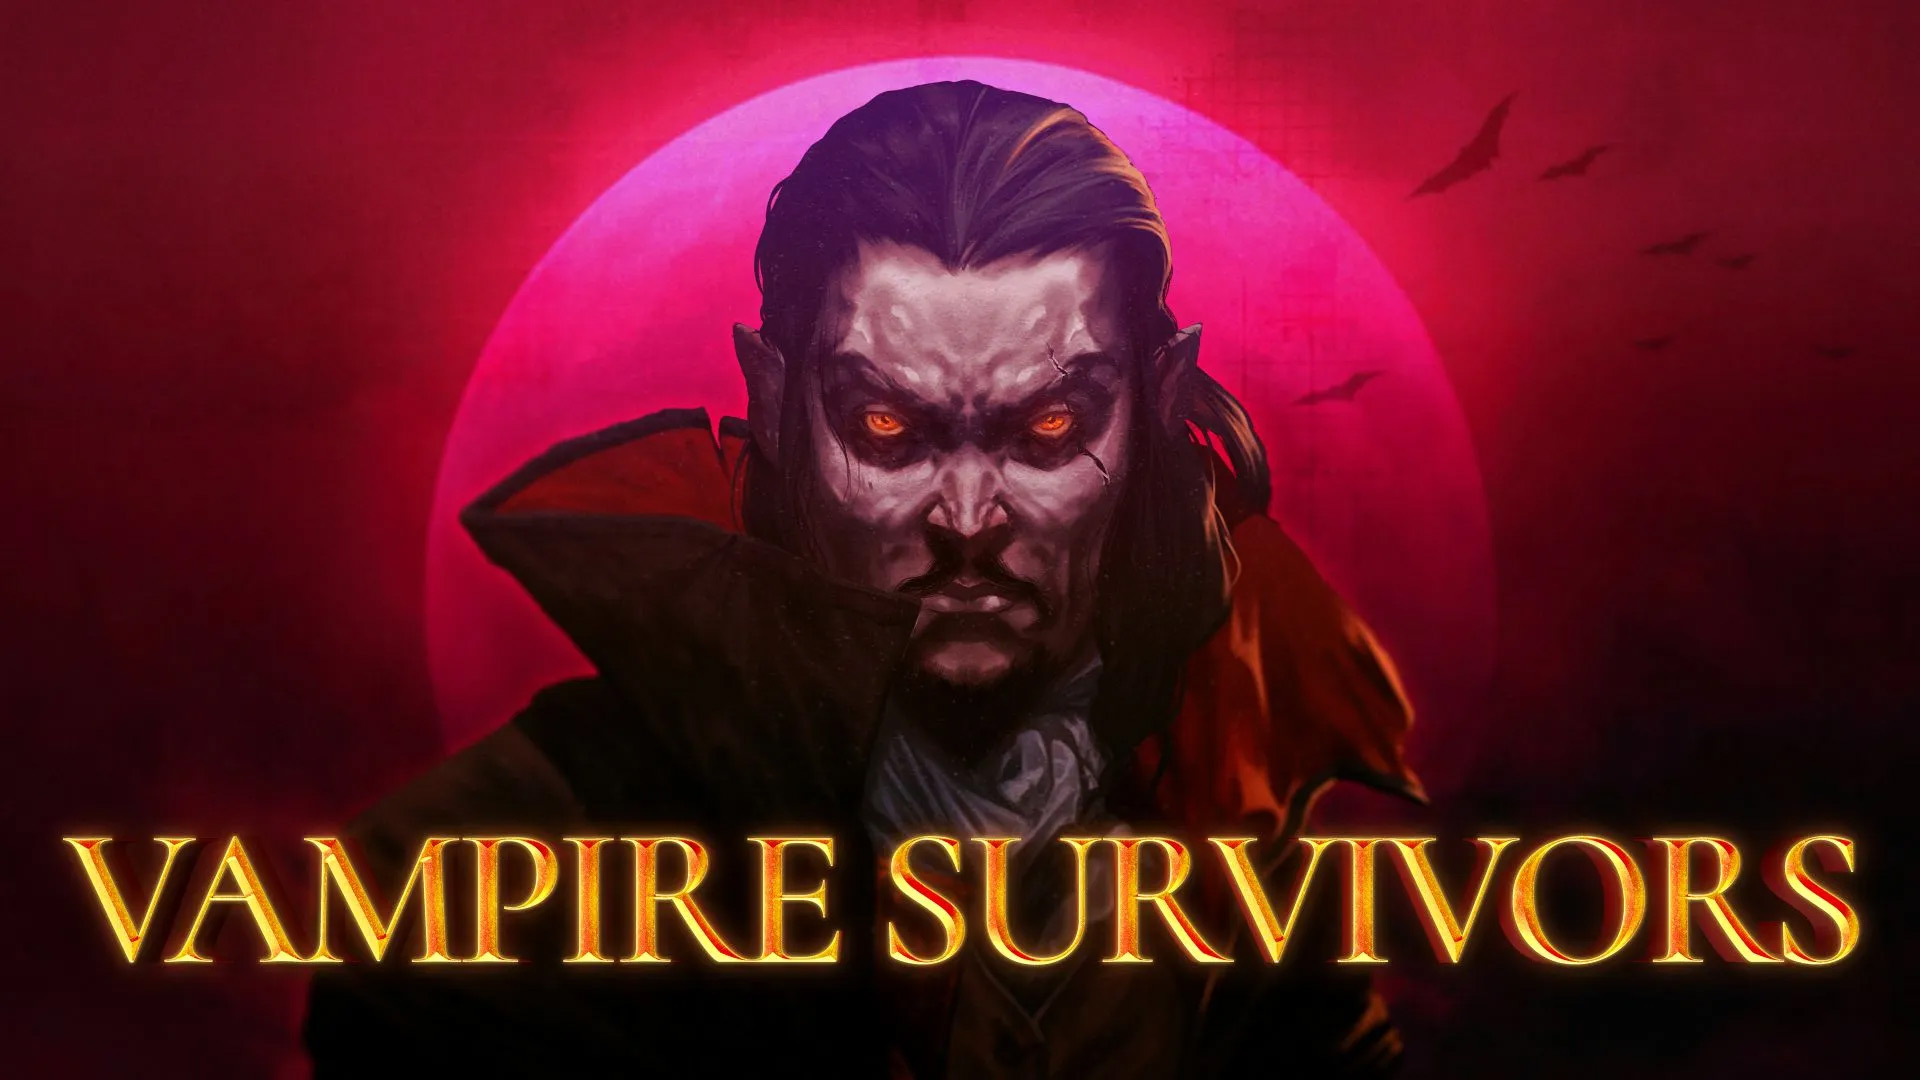 Vampire Survivors is getting an animated series adaptation